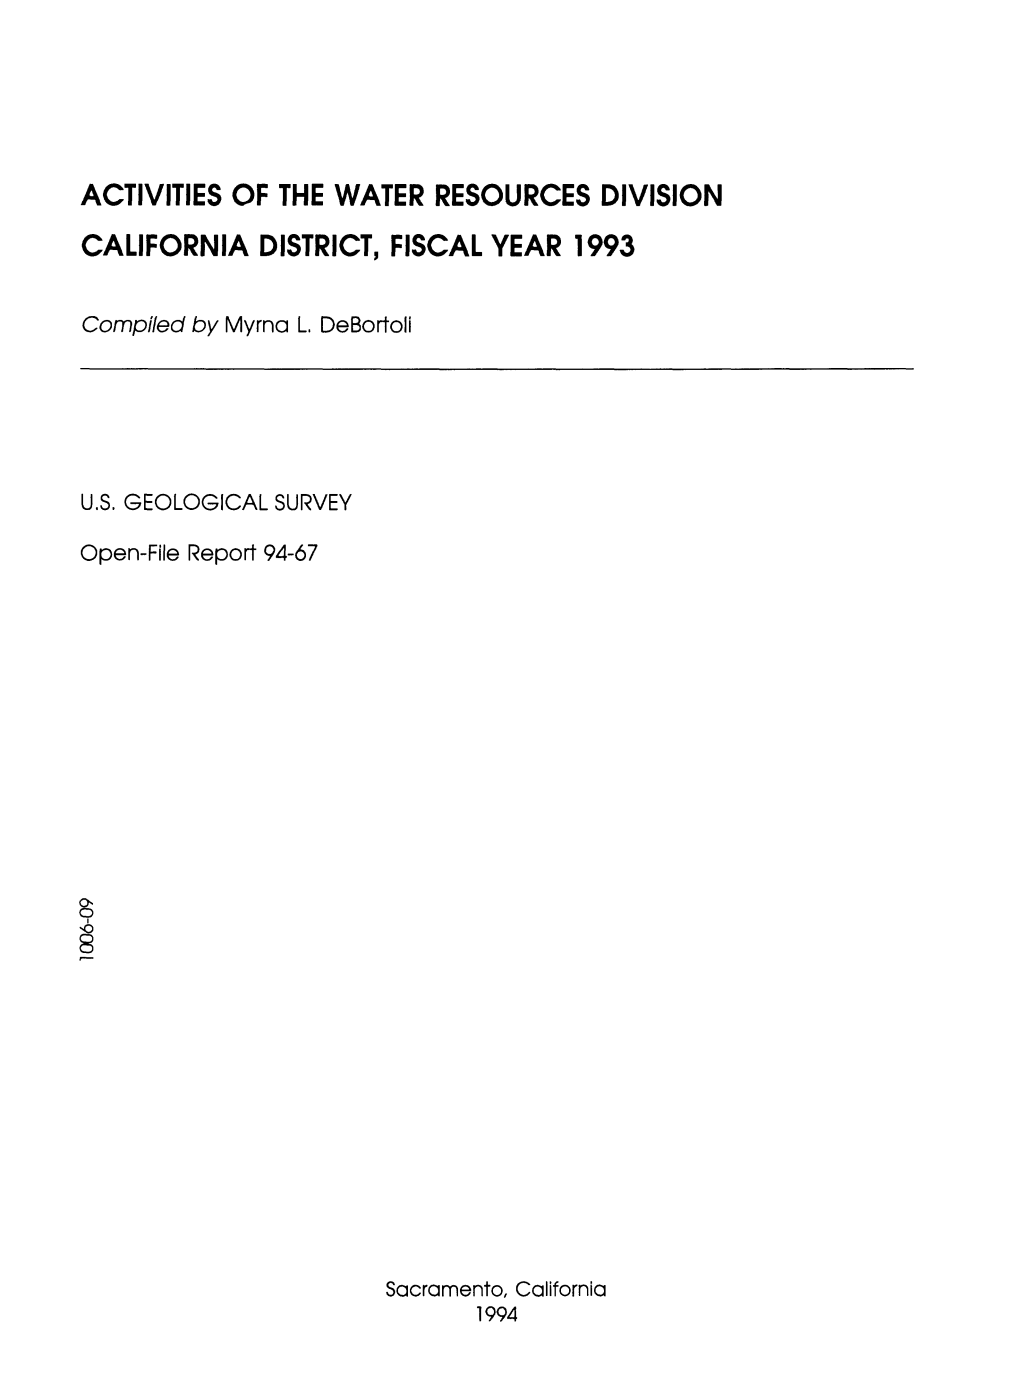 Activities of the Water Resources Division, California District, Fiscal Year 1993 U